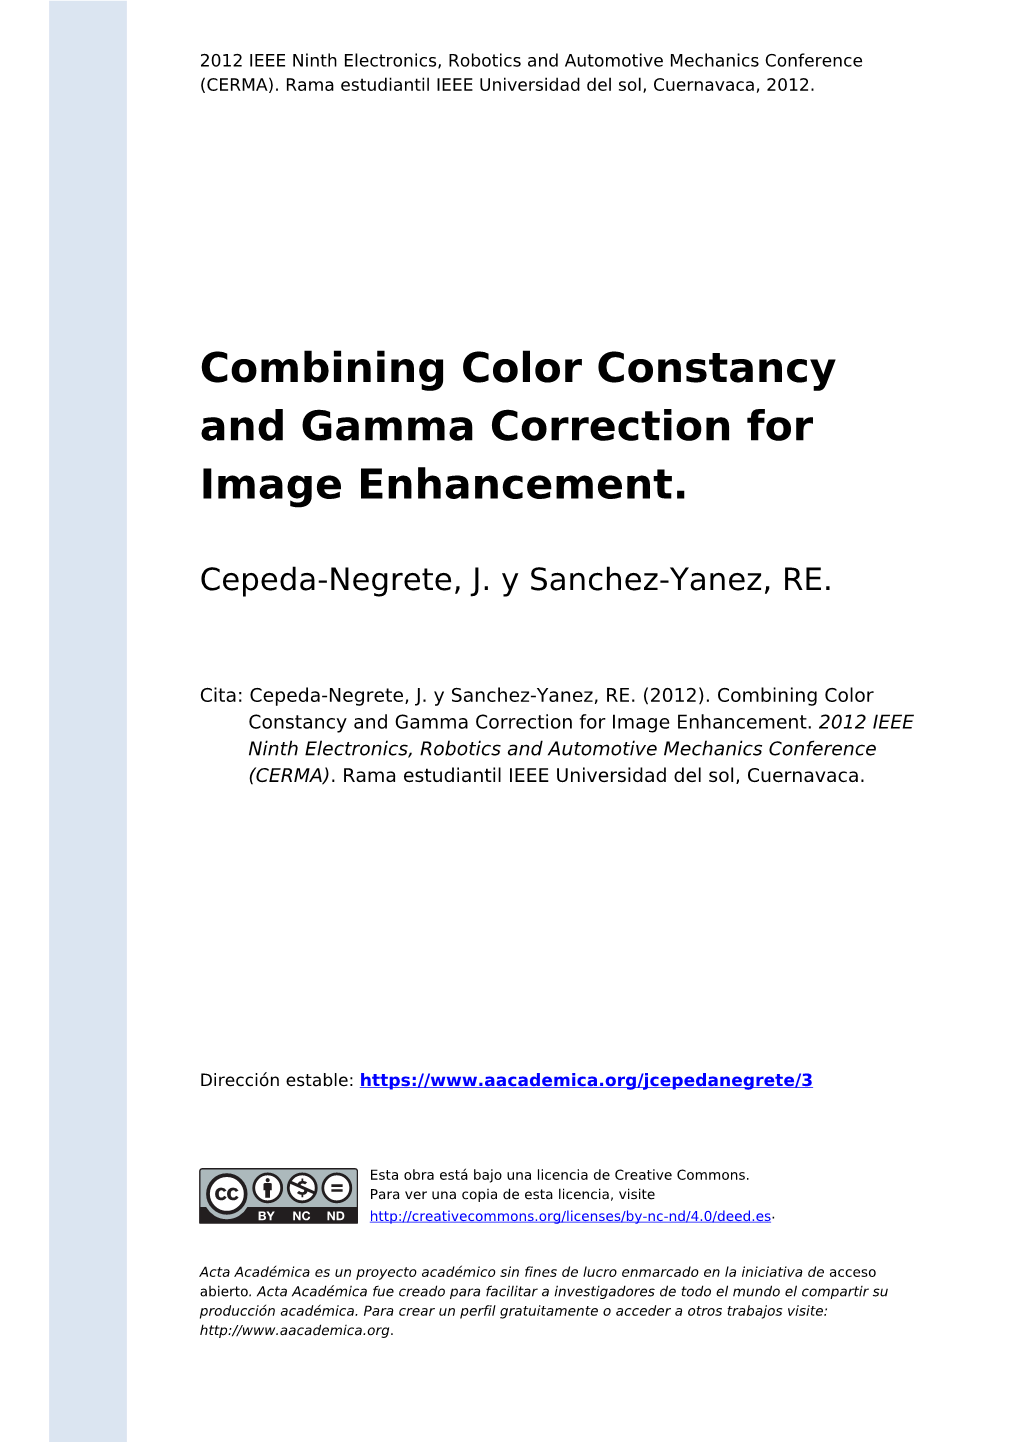 Combining Color Constancy and Gamma Correction for Image Enhancement